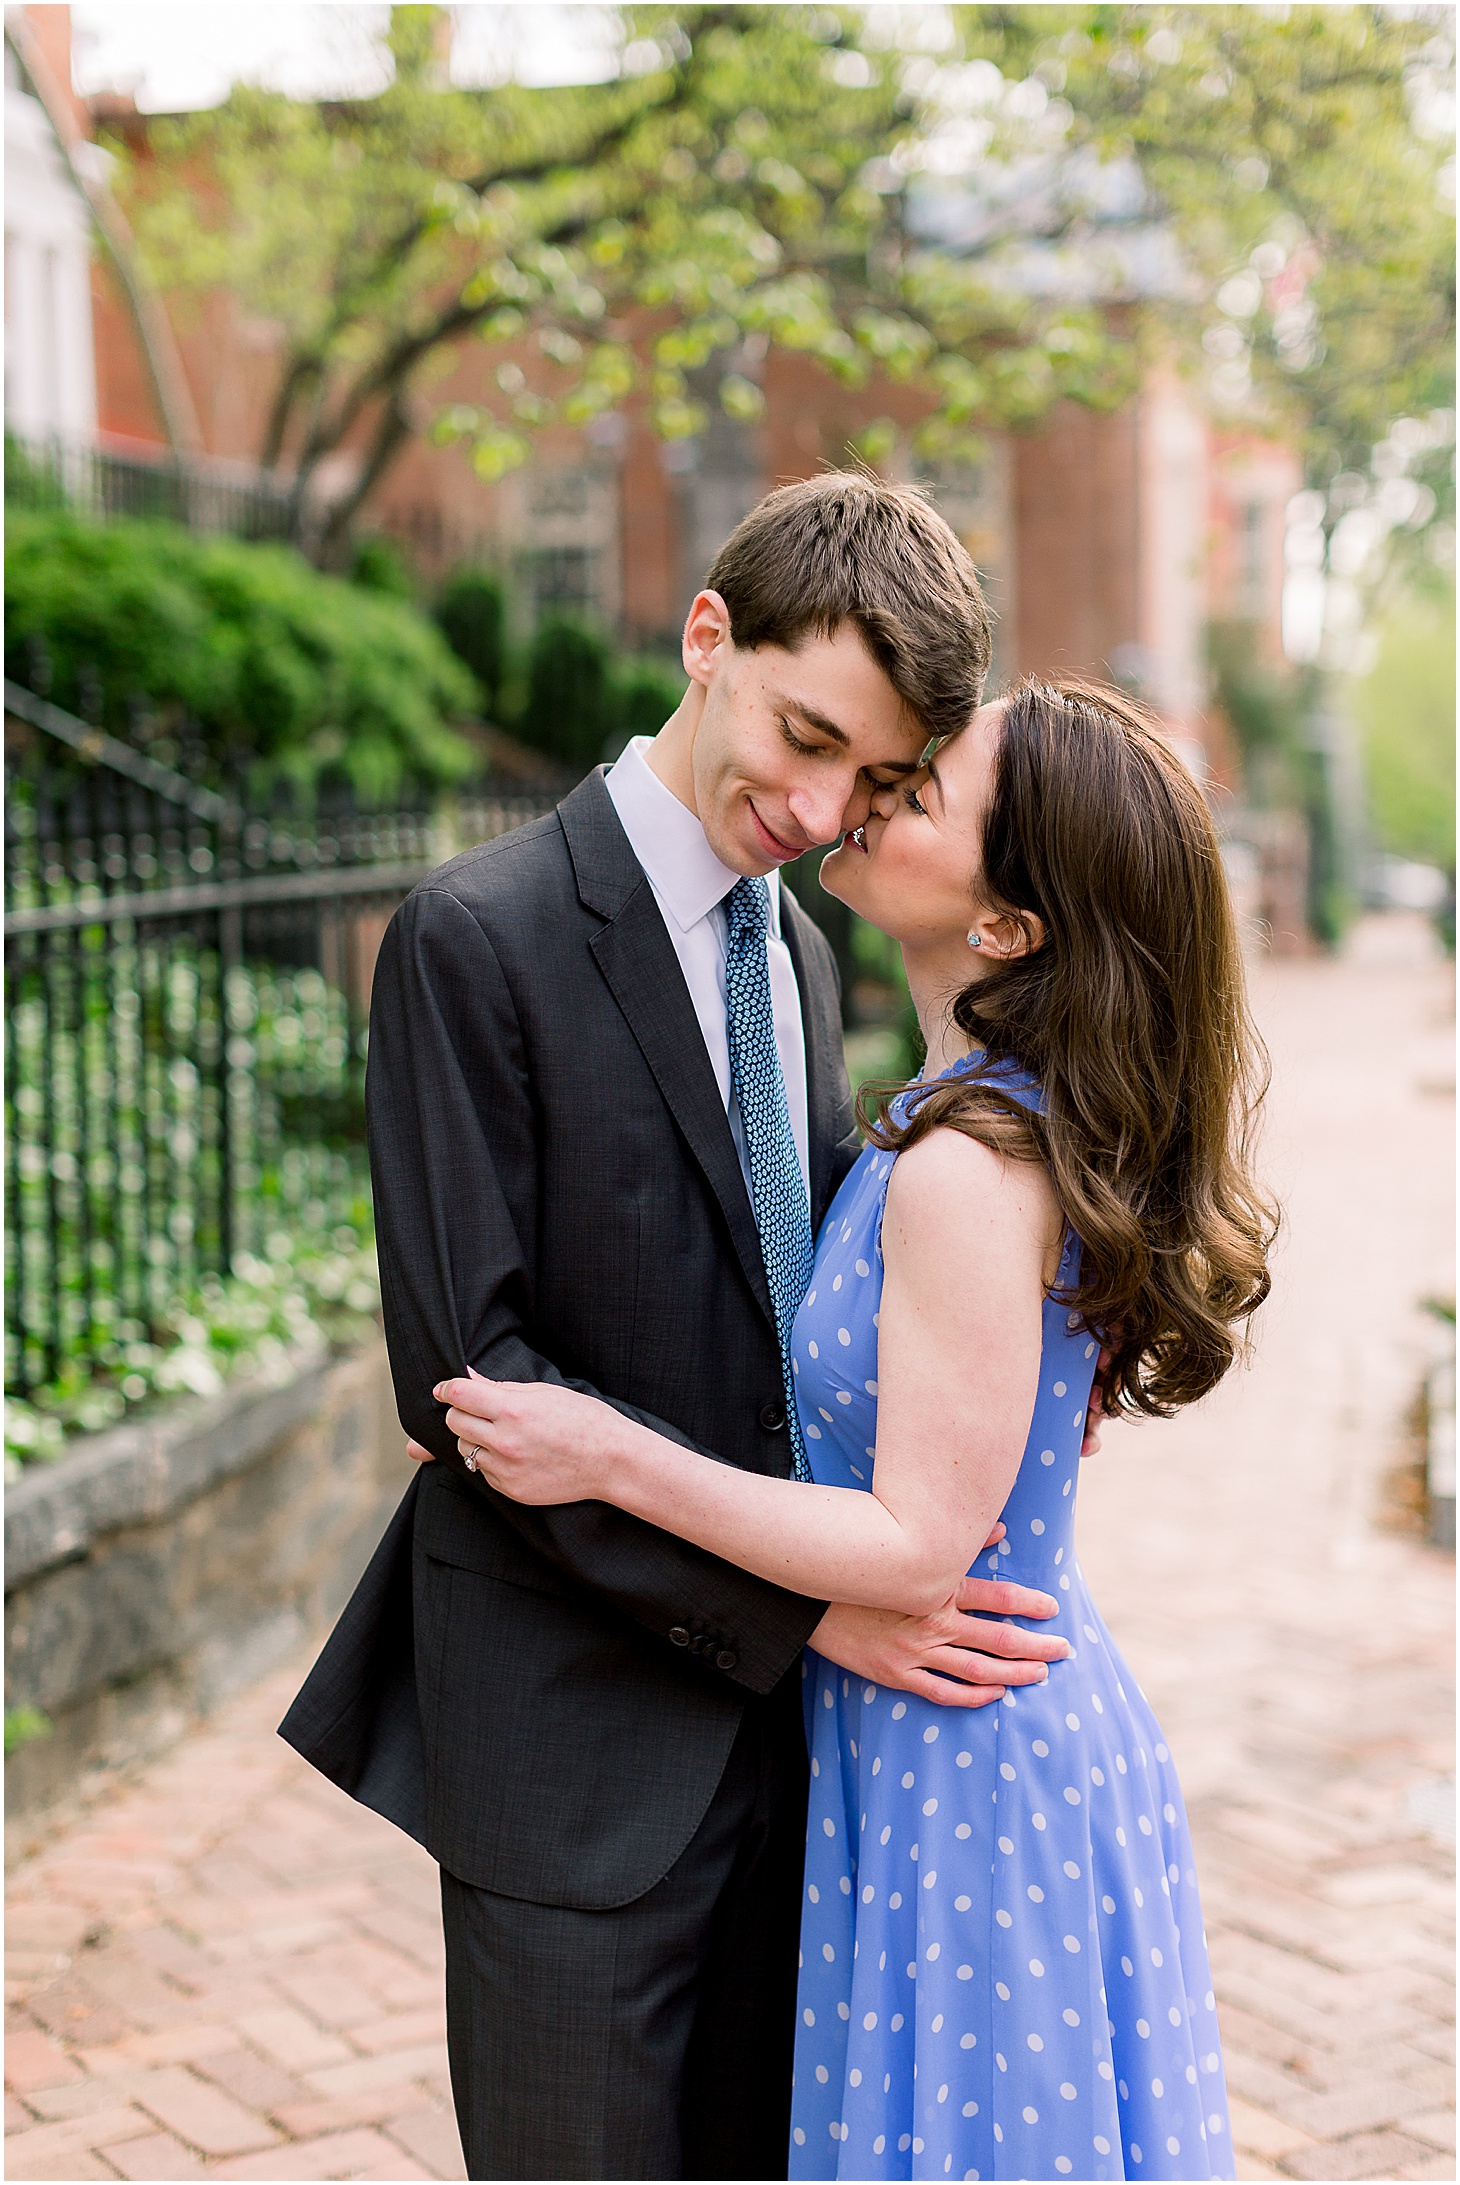 Engagement Portraits in Georgetown, Spring Blooms Engagement Session at the United States Supreme Court, Sarah Bradshaw Photography, DC Engagement Photographer